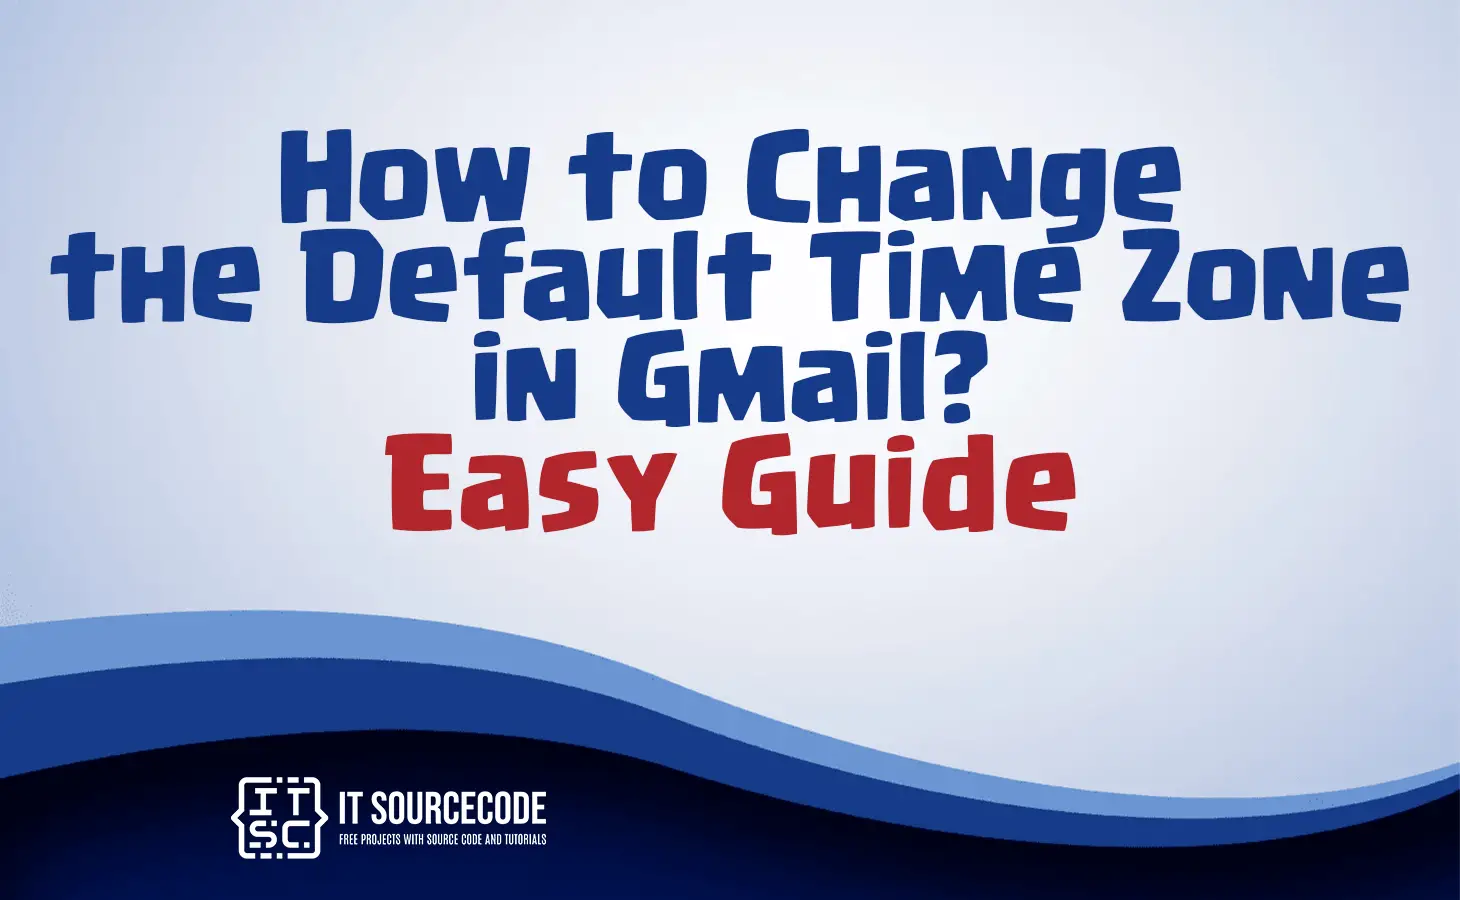 How to Change the Default Time Zone in Gmail? Easy Guide